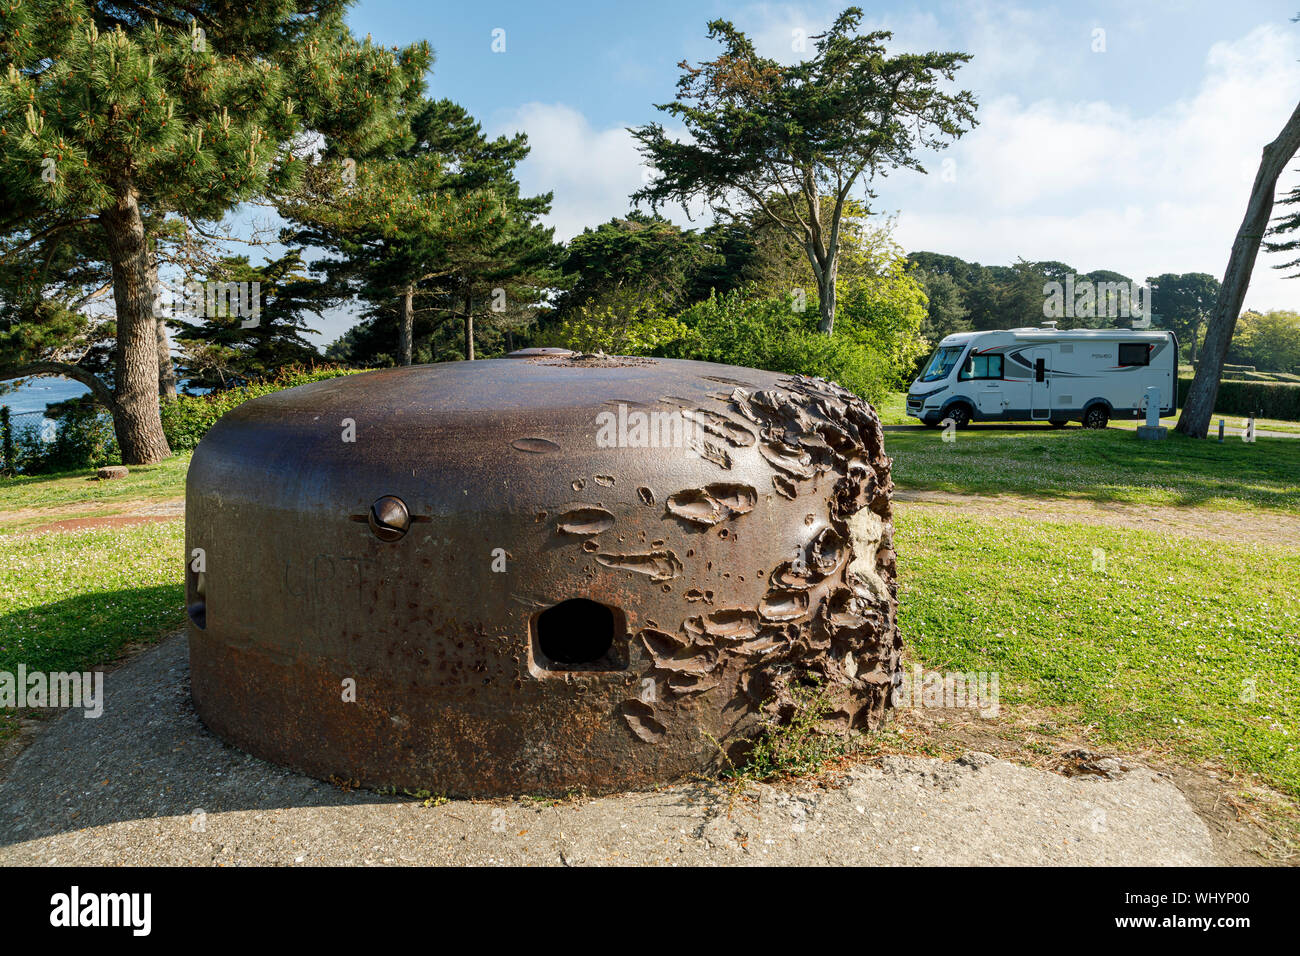 Motorhome camped beside the German gun emplacements, which show the scars from invading allied forces, at Camping de la Cité d'Aleth, St Malo Stock Photo